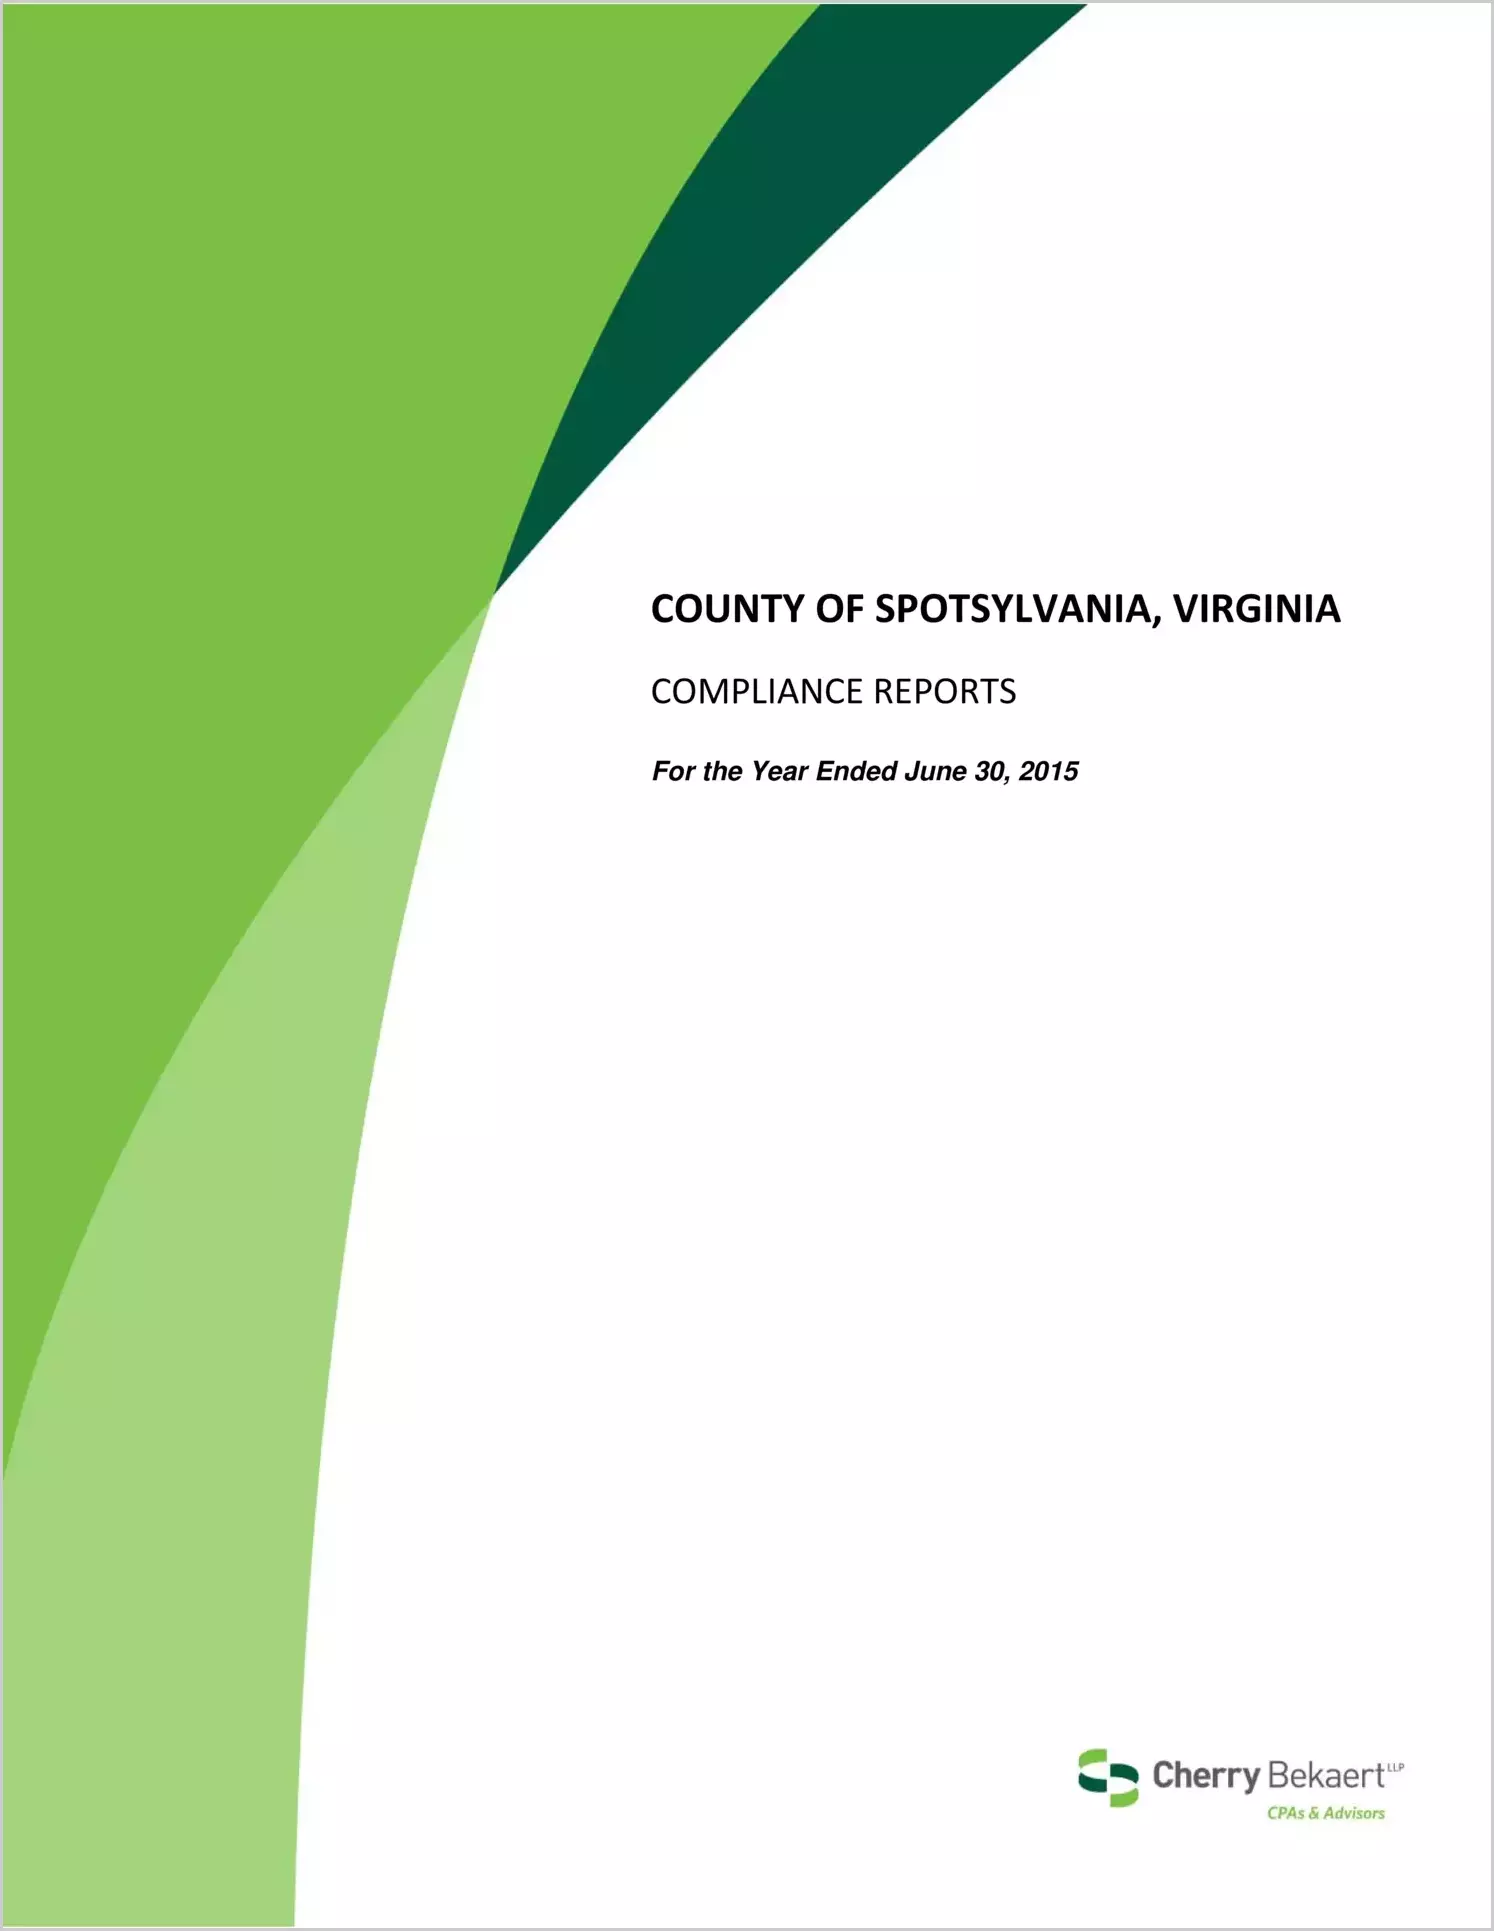 2015 Internal Control and Compliance Report for County of Spotsylvania